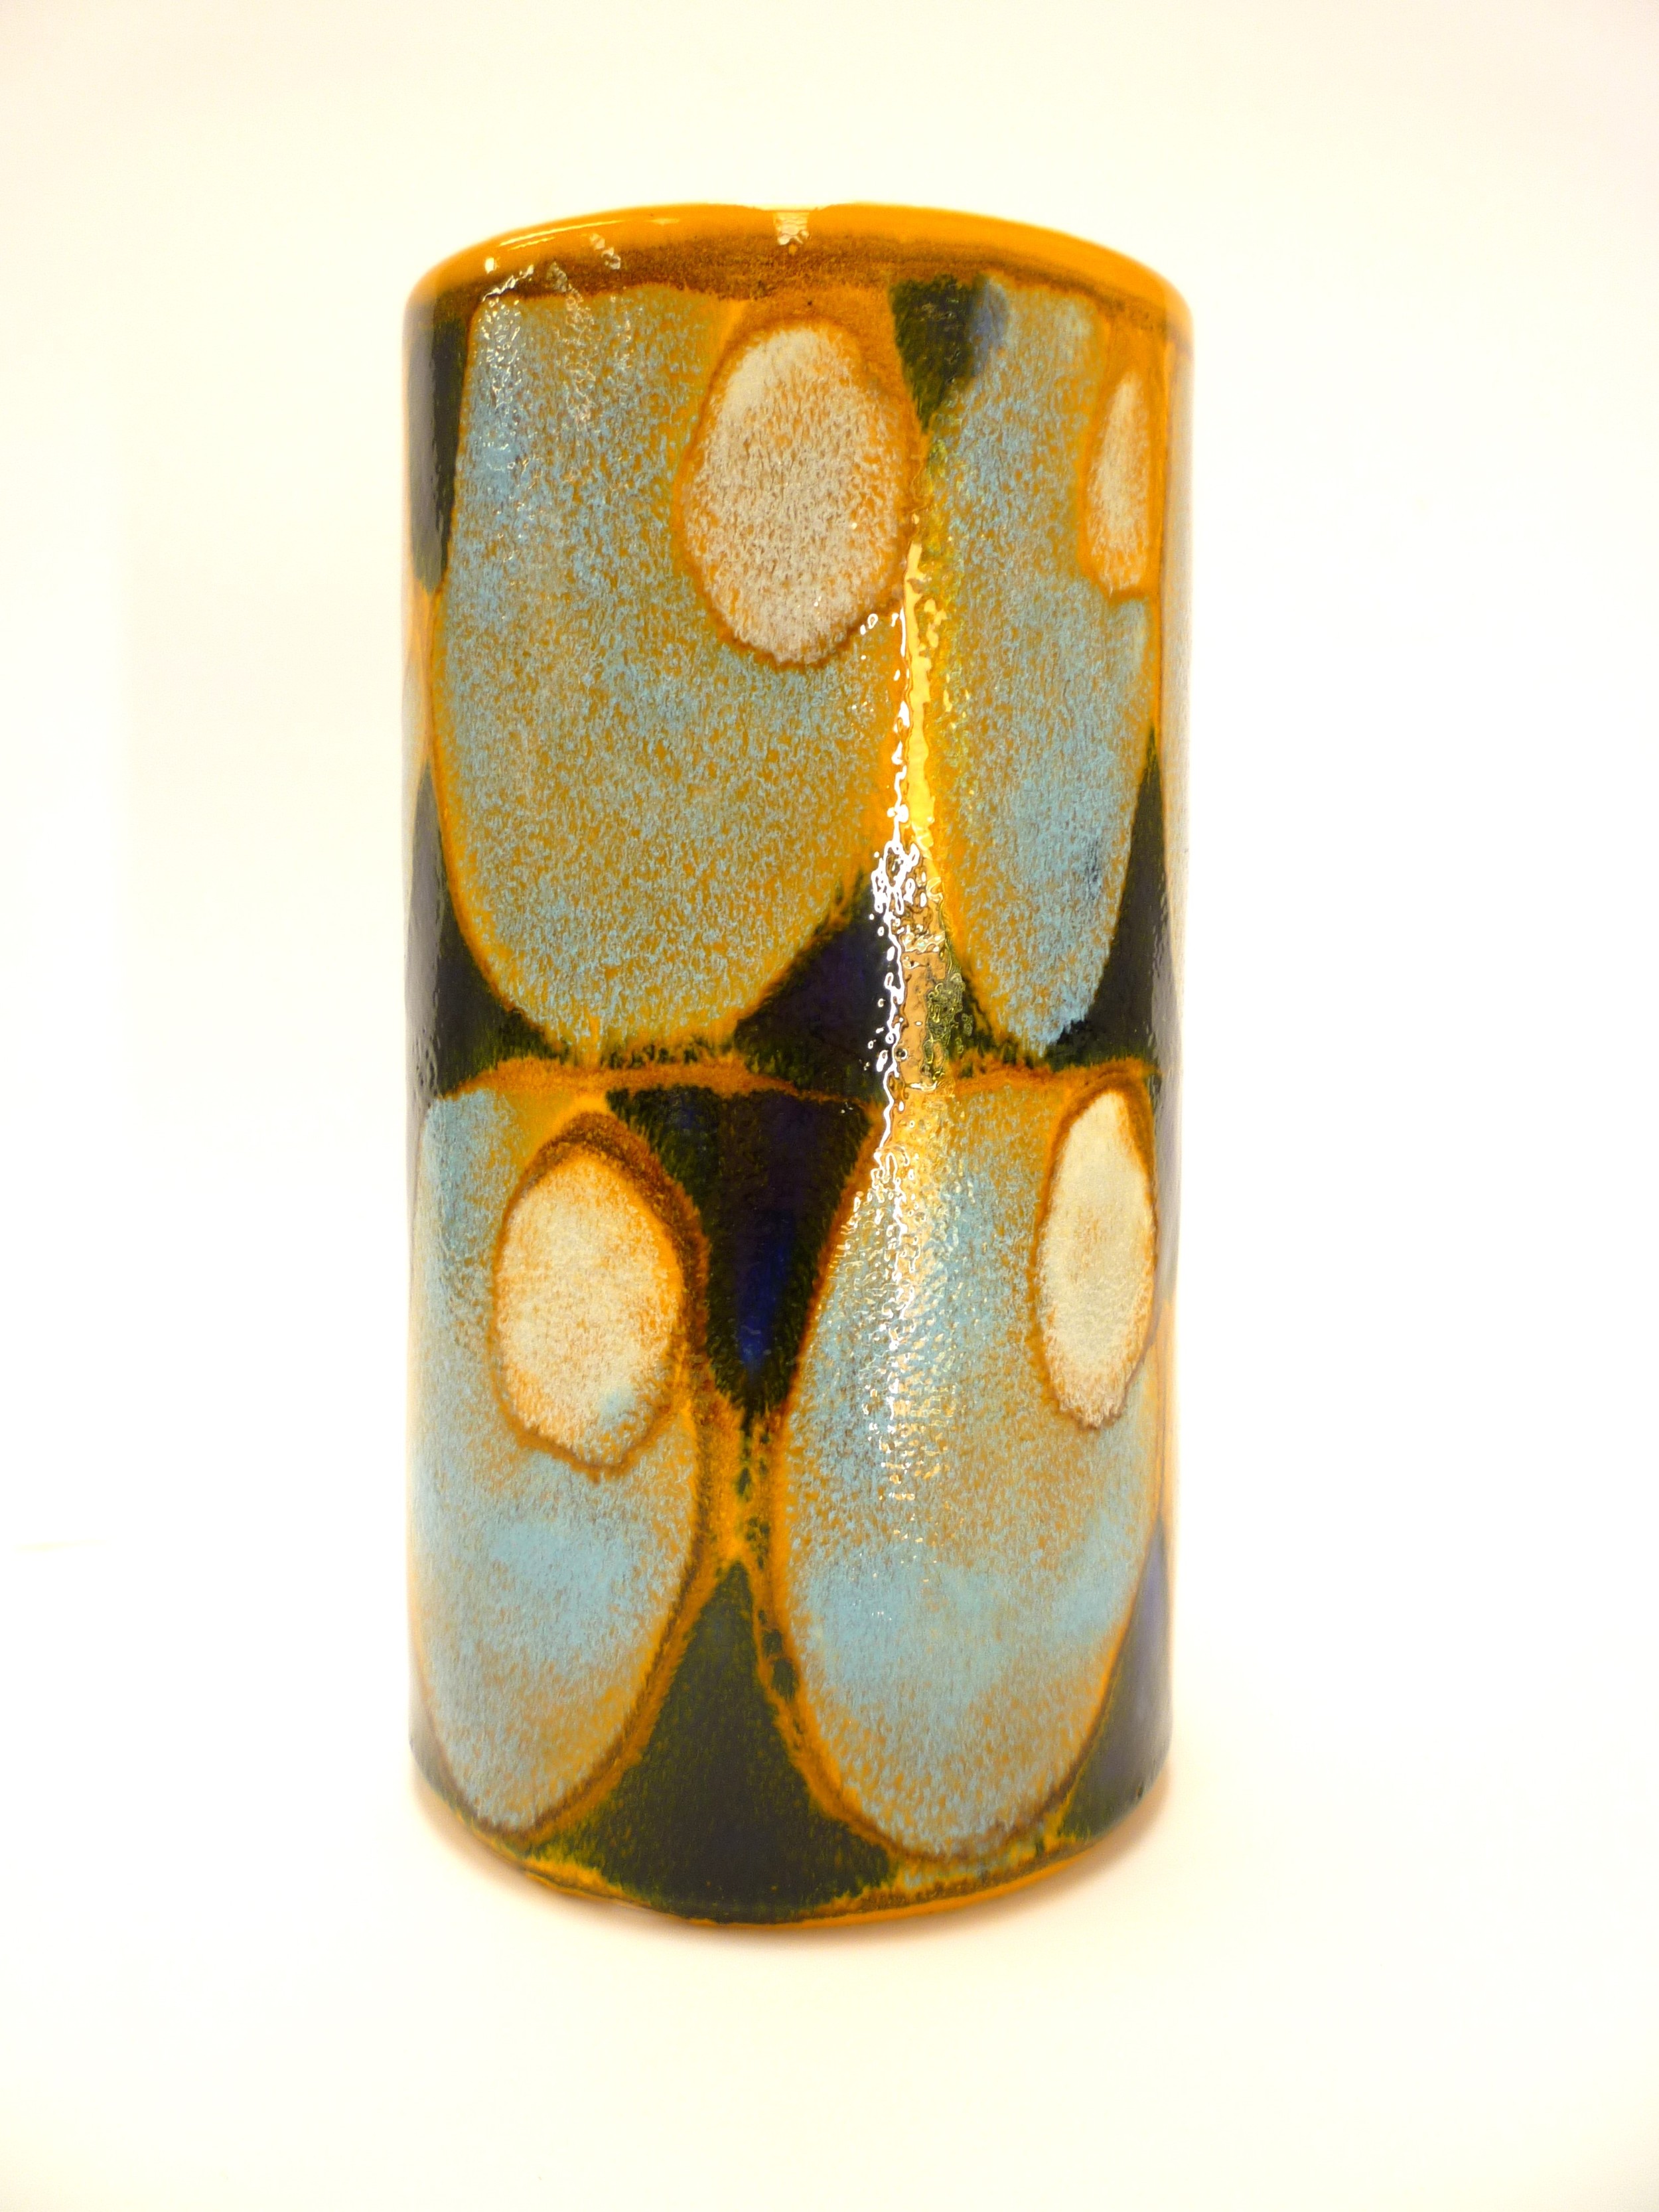 A Poole Pottery Delphis range cylindrical vase in yellow, blue and black. Black back stamp and No. - Image 2 of 4